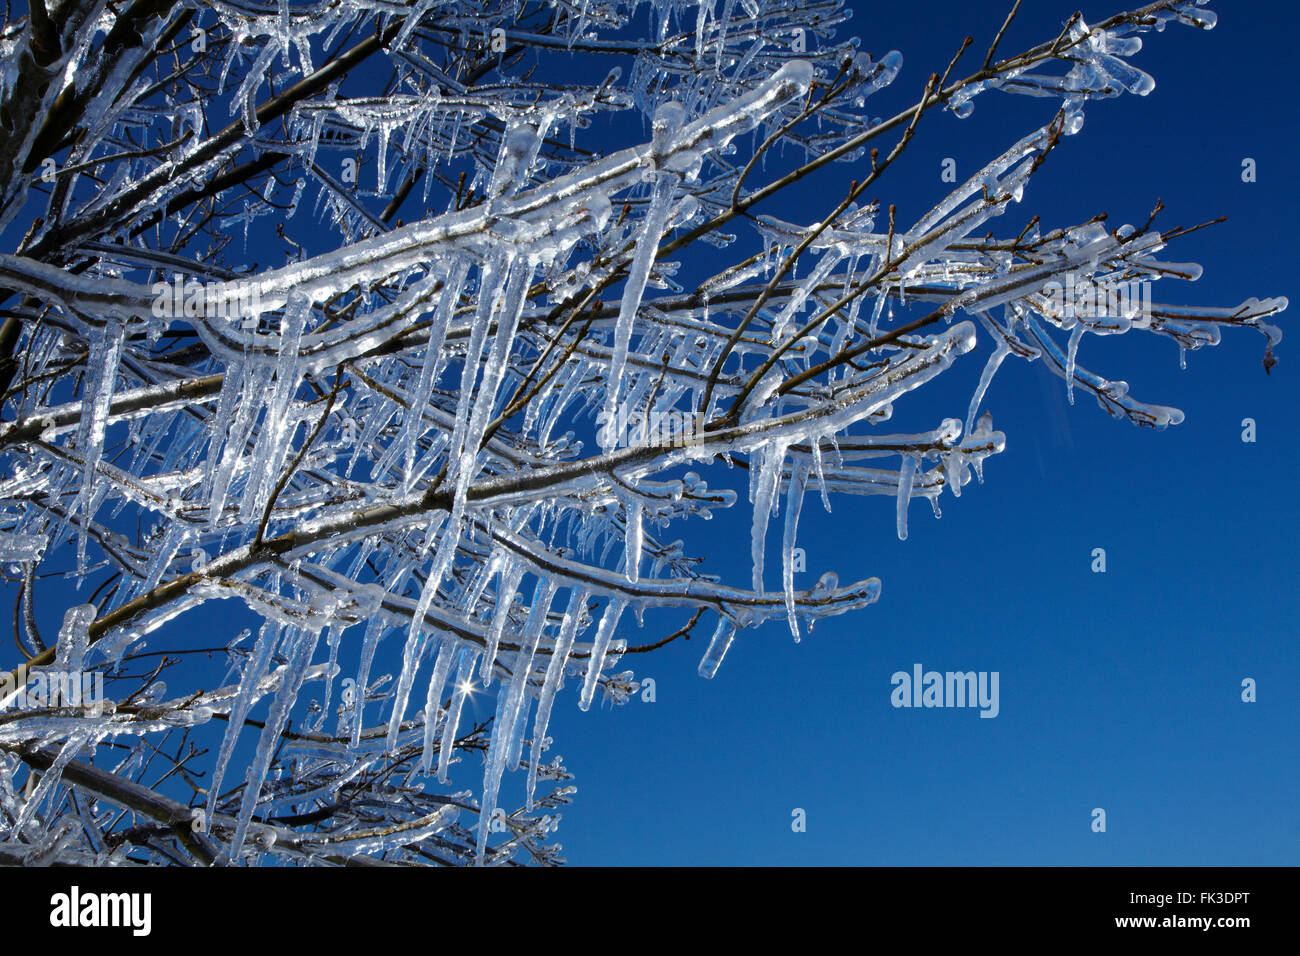 Icicles on orchard tree, from spring frost fighting using sprinklers. near Alexandra, Central Otago, South Island, New Zealand Stock Photo